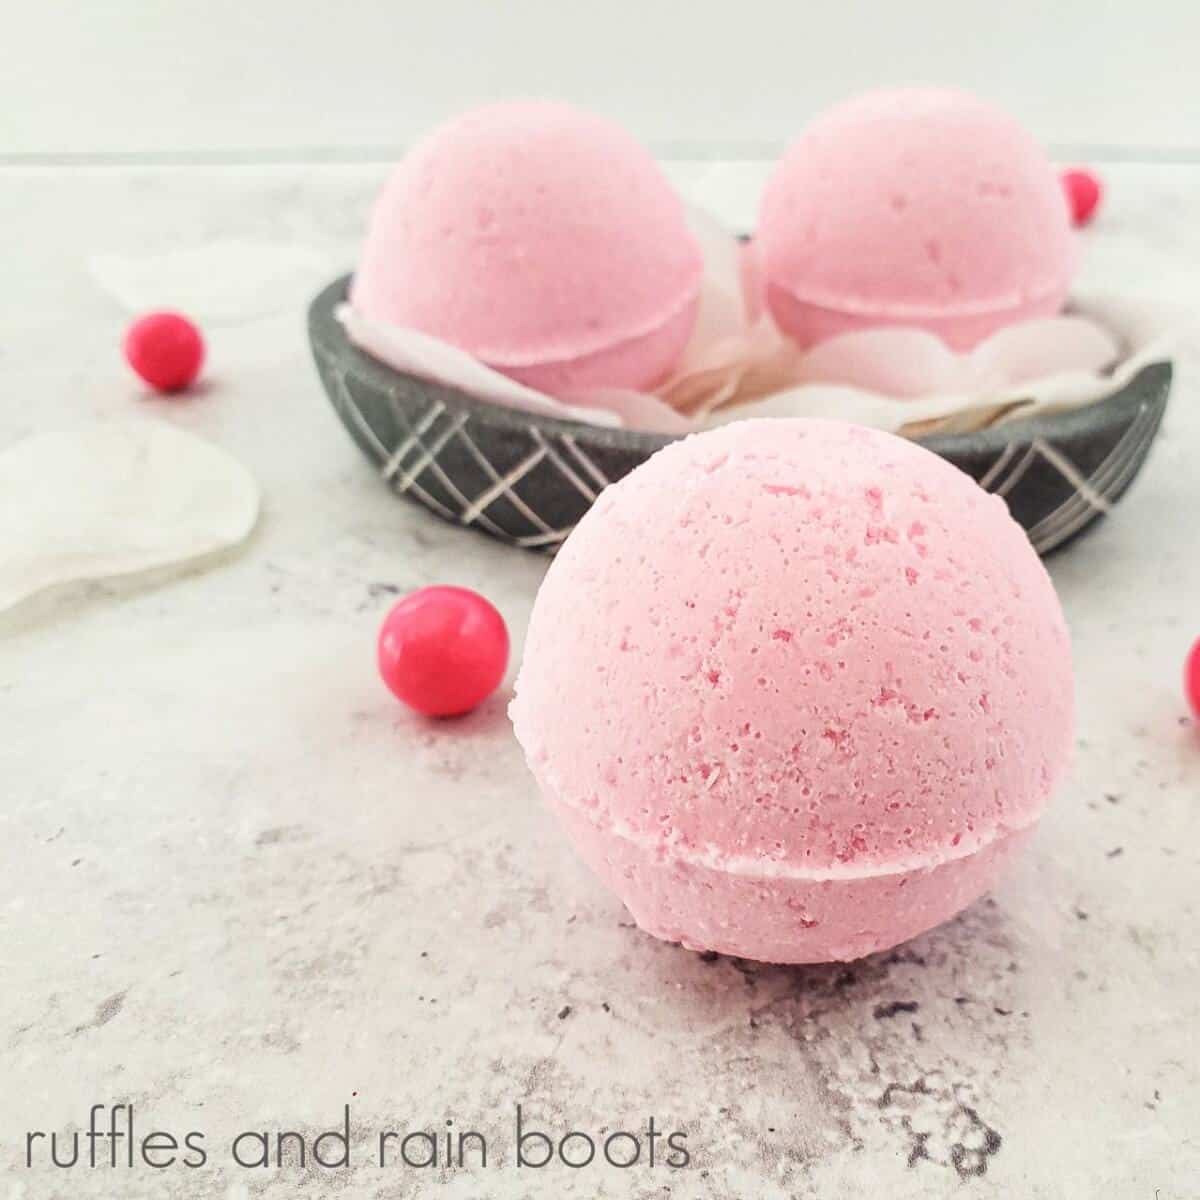 Close-up image of a large pink bath bomb in front of a small black and white bowl with two smaller bath bombs, next to several bubblegum balls and faux flower petals on a white concrete background.